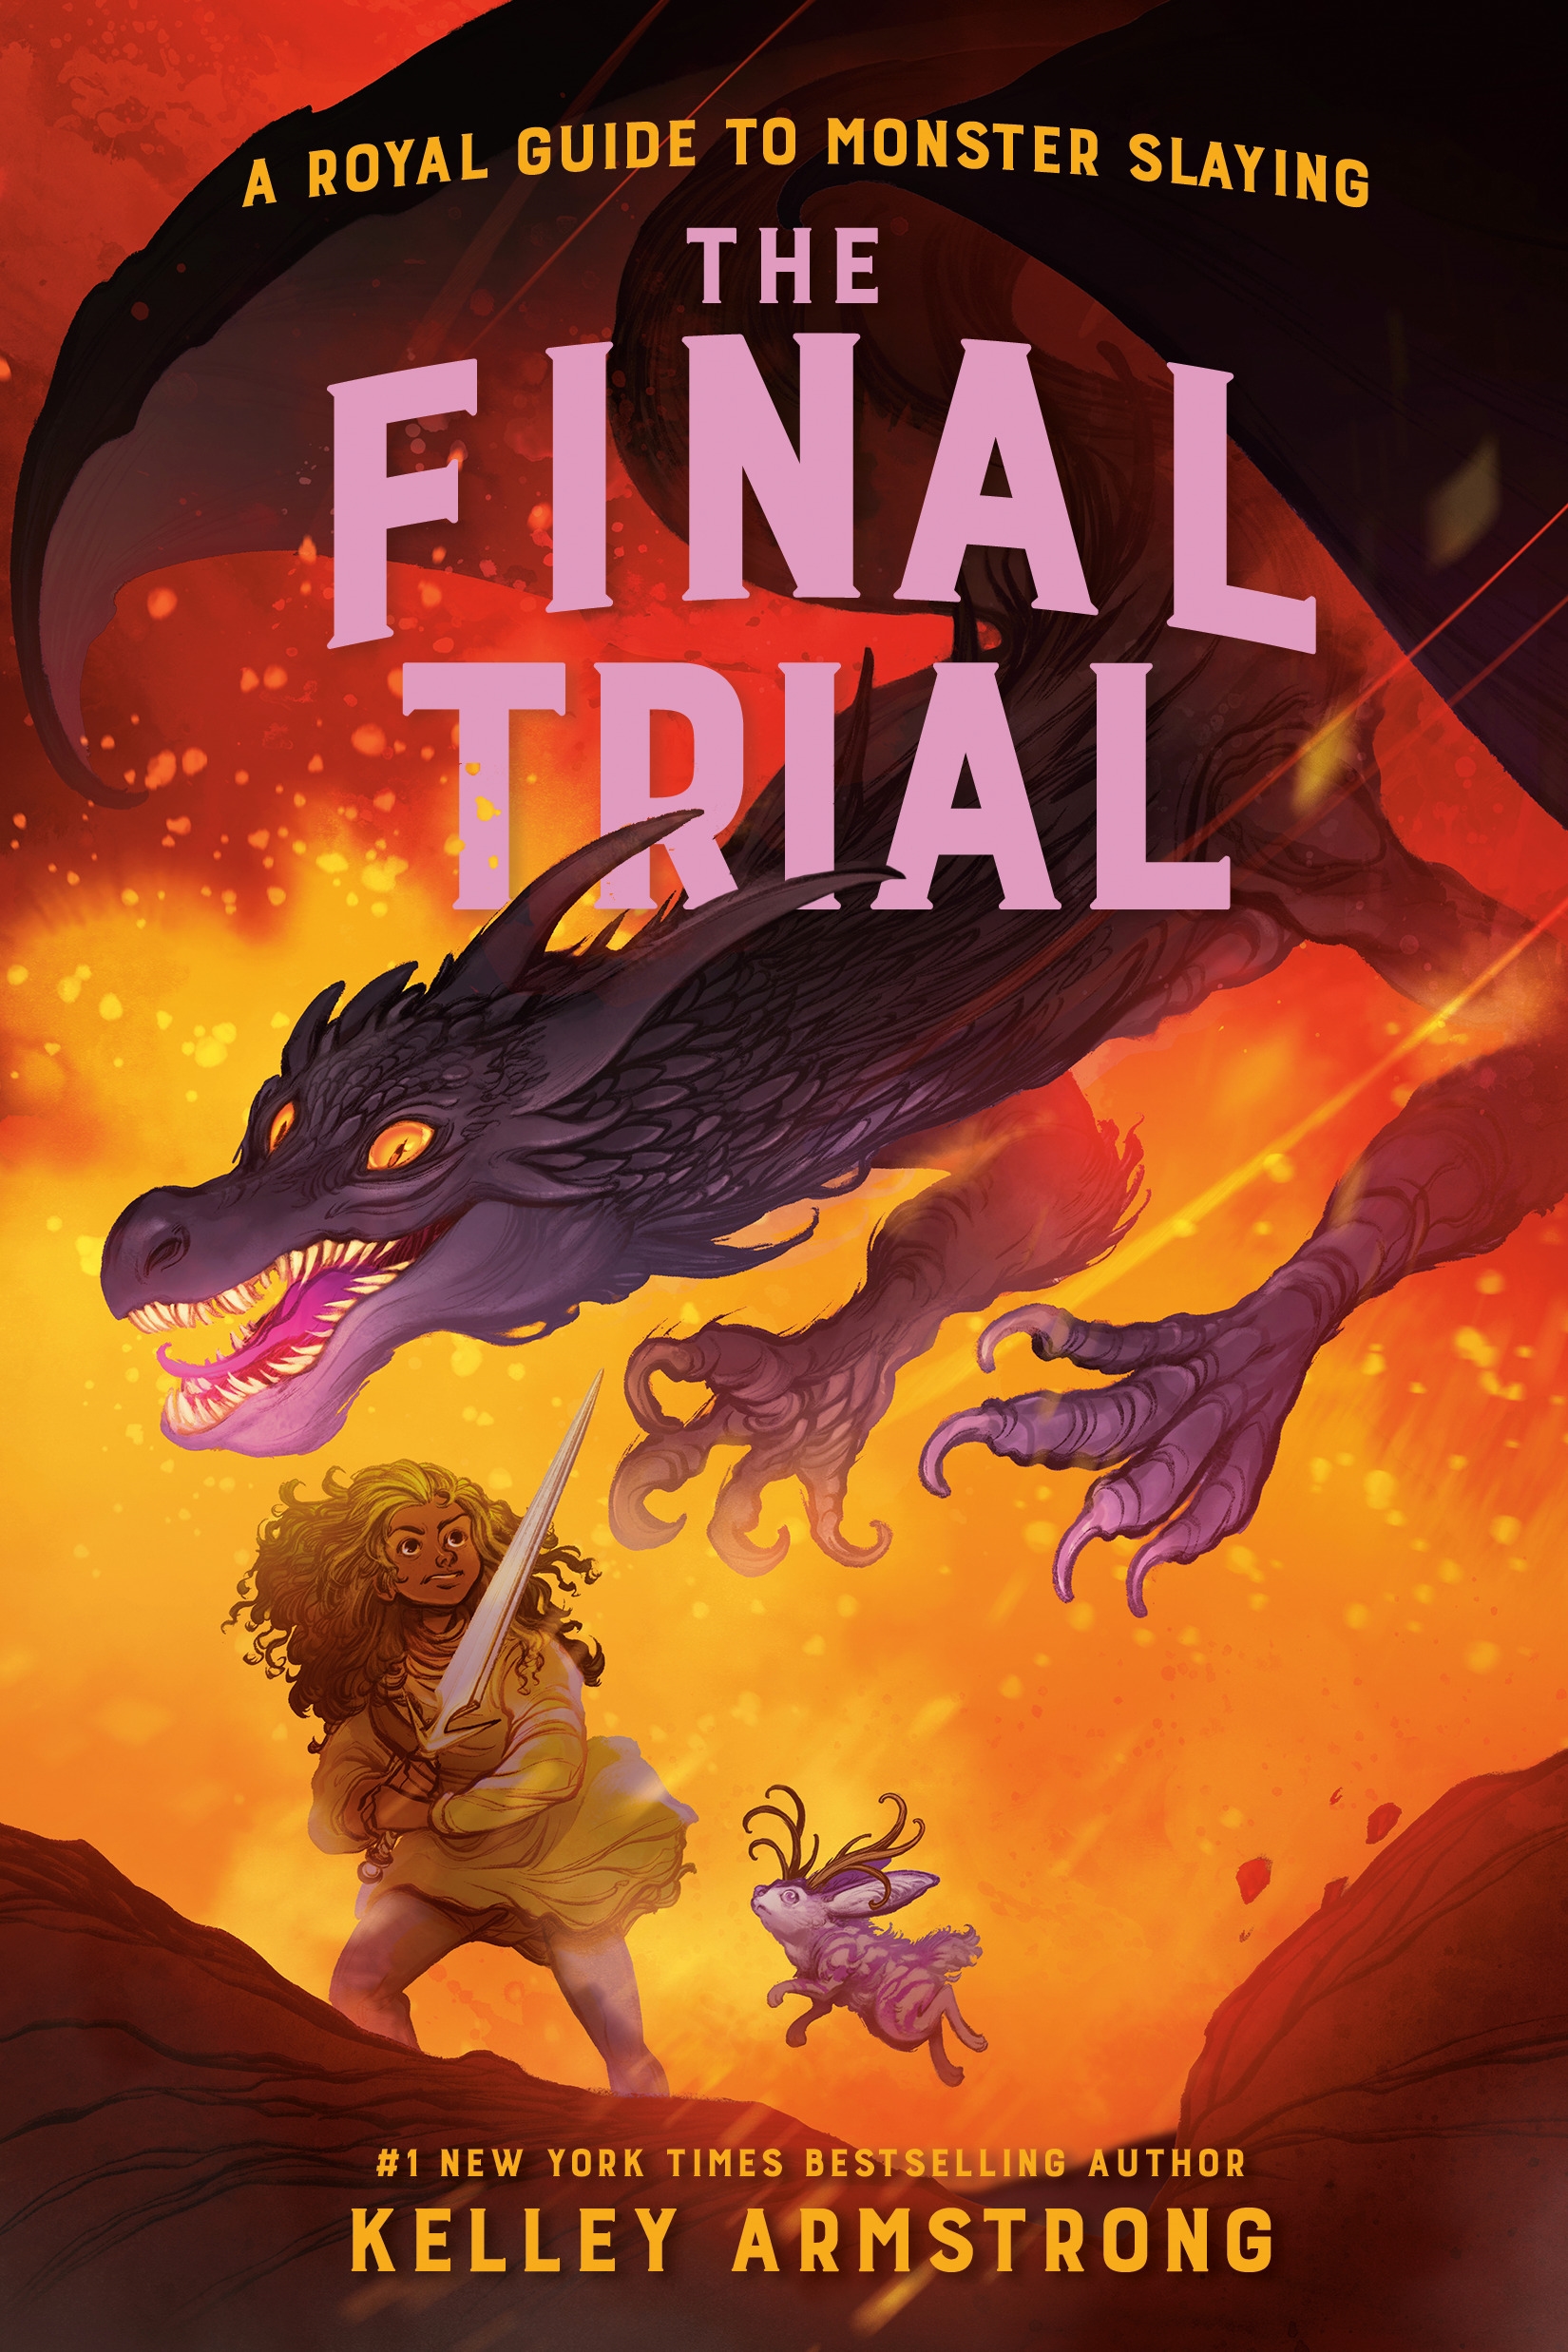 The Final Trial: Royal Guide to Monster Slaying Book 4 by Kelley